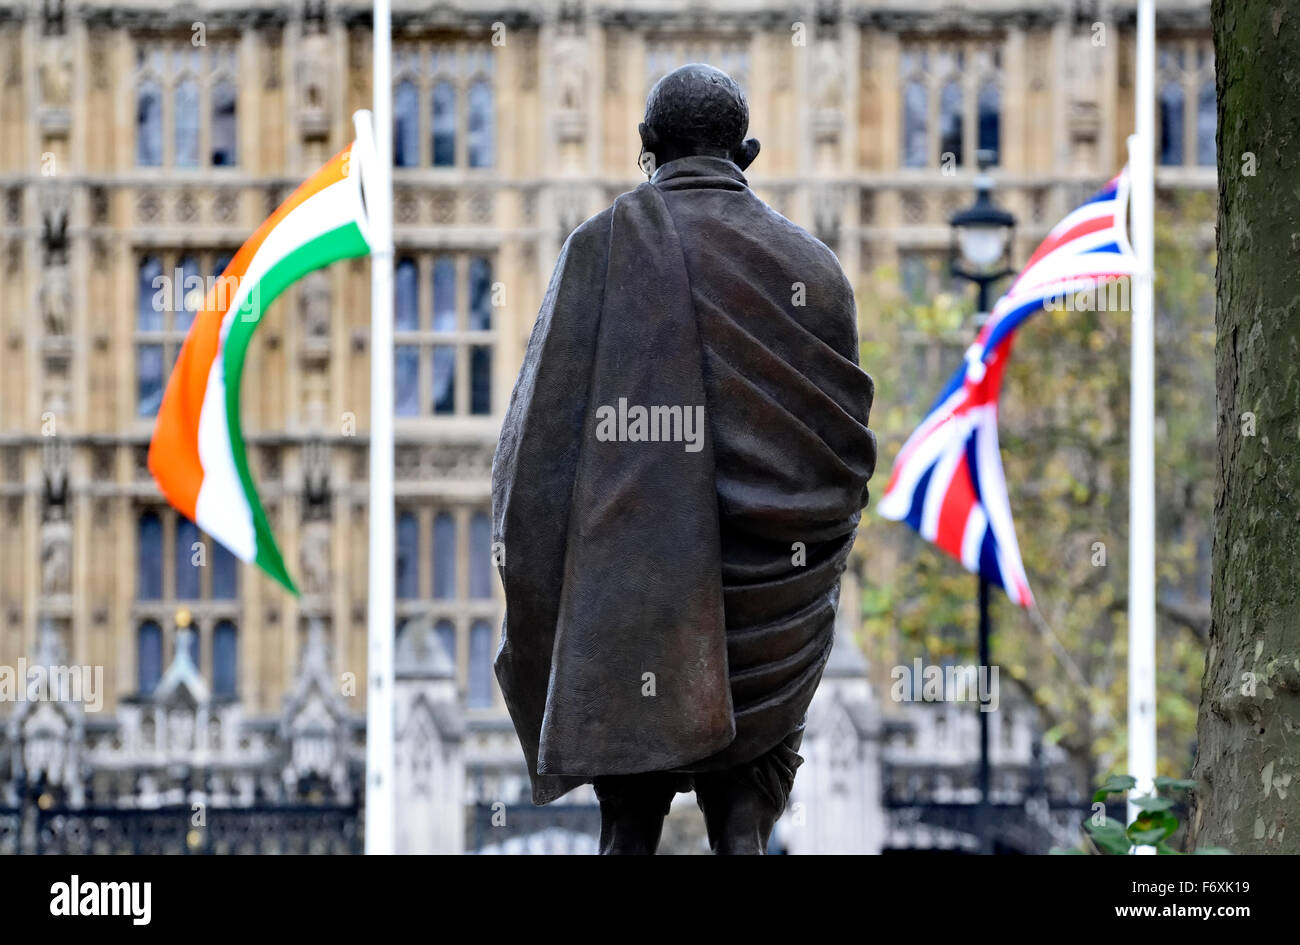 London, England, UK. Statue of Mahatma Gandhi, Parliament Square. (2015: Philip Jackson) with Indian and British flags Stock Photo